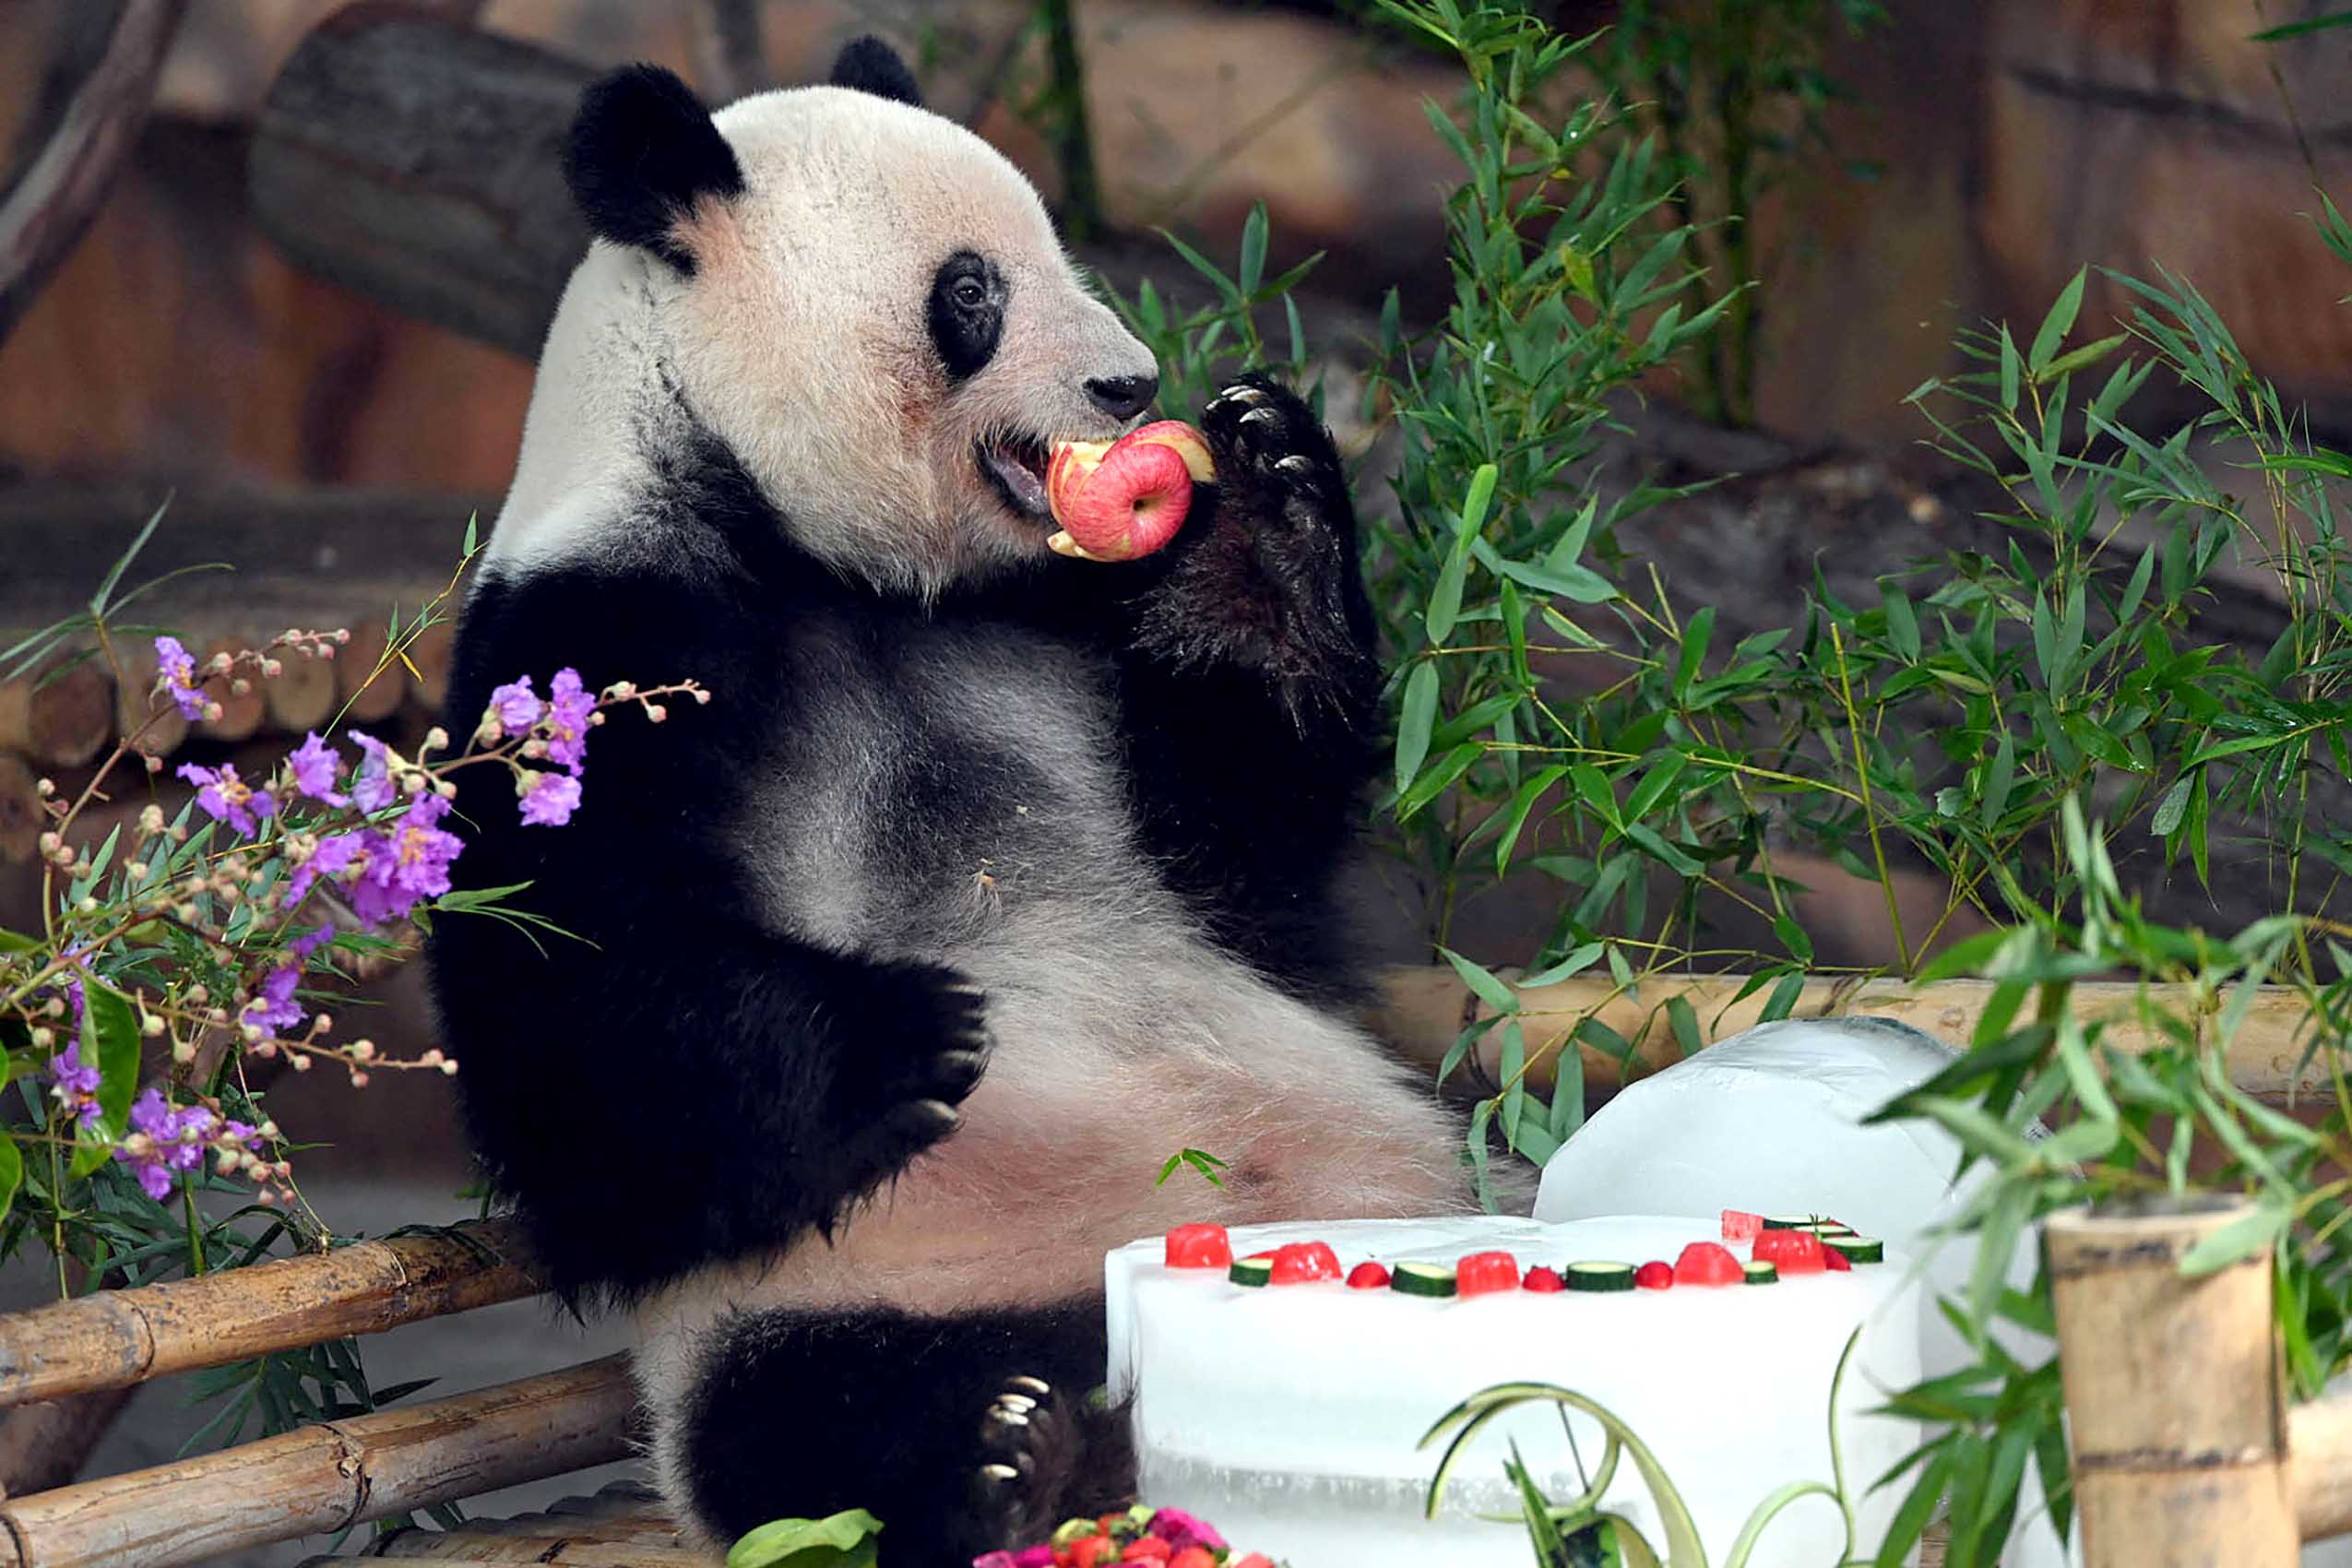 This photo taken on June 27, 2022 shows a panda enjoying a cake made with ice during its birthday at a zoo in Nanning, in China's southern Guangxi region. (Photo by AFP) / China OUT